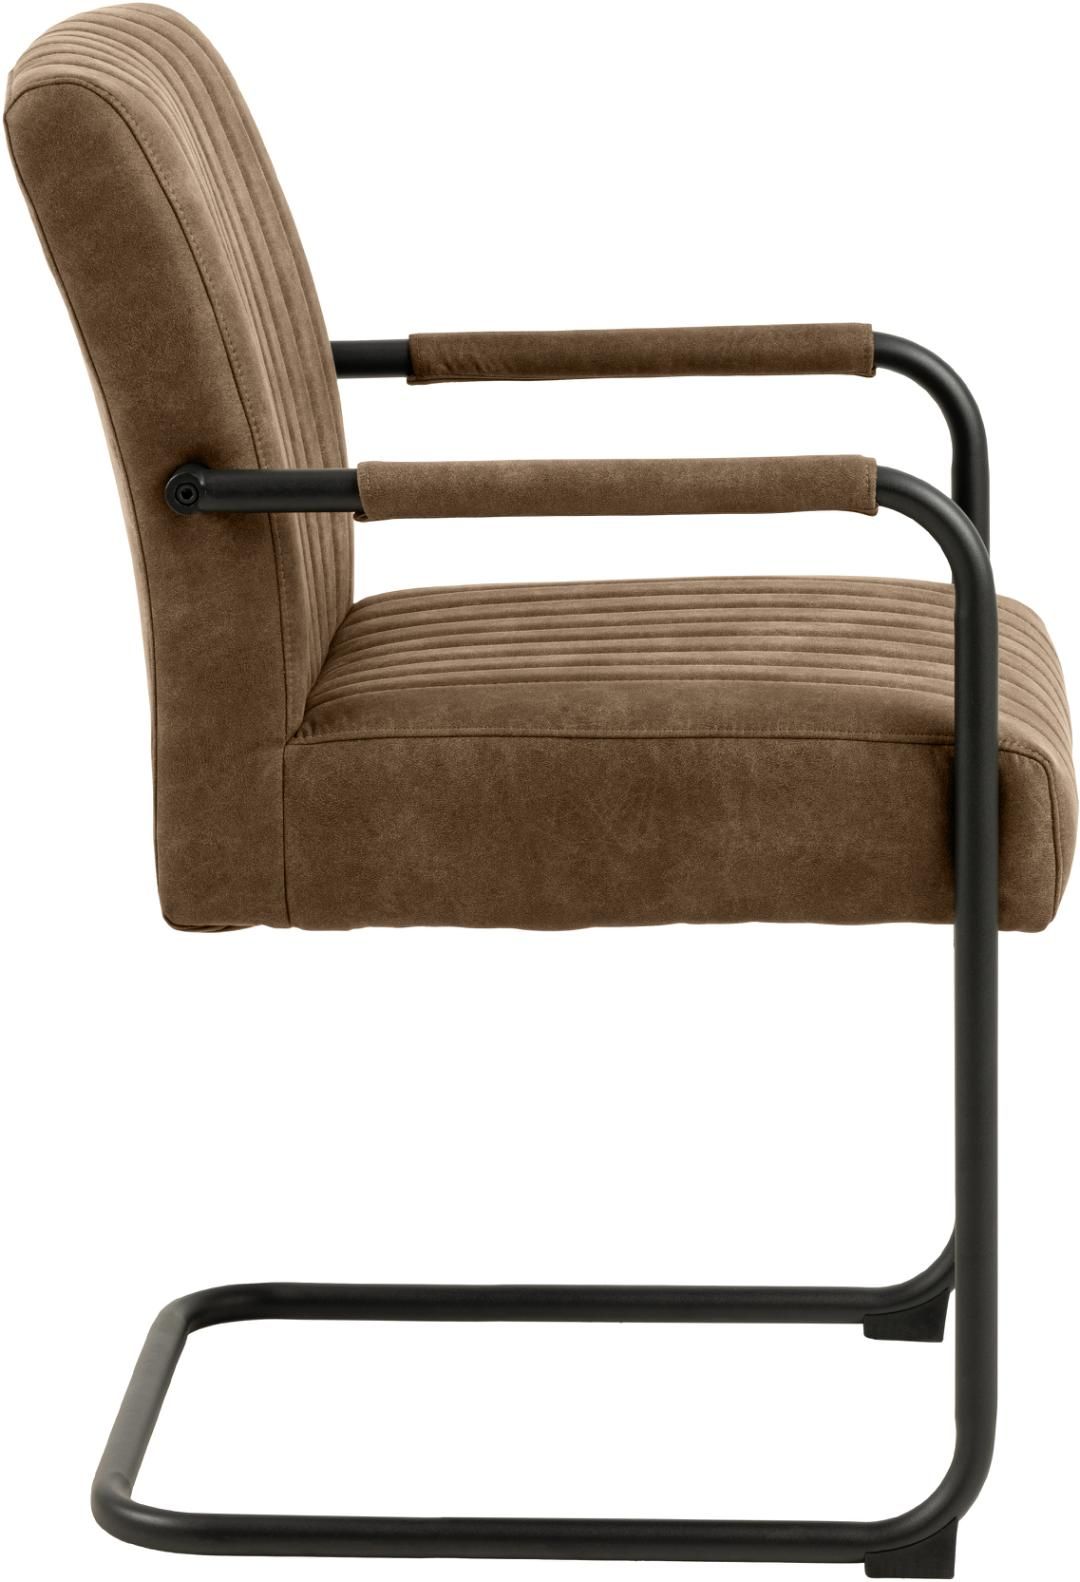 Adele dining chair with armrest